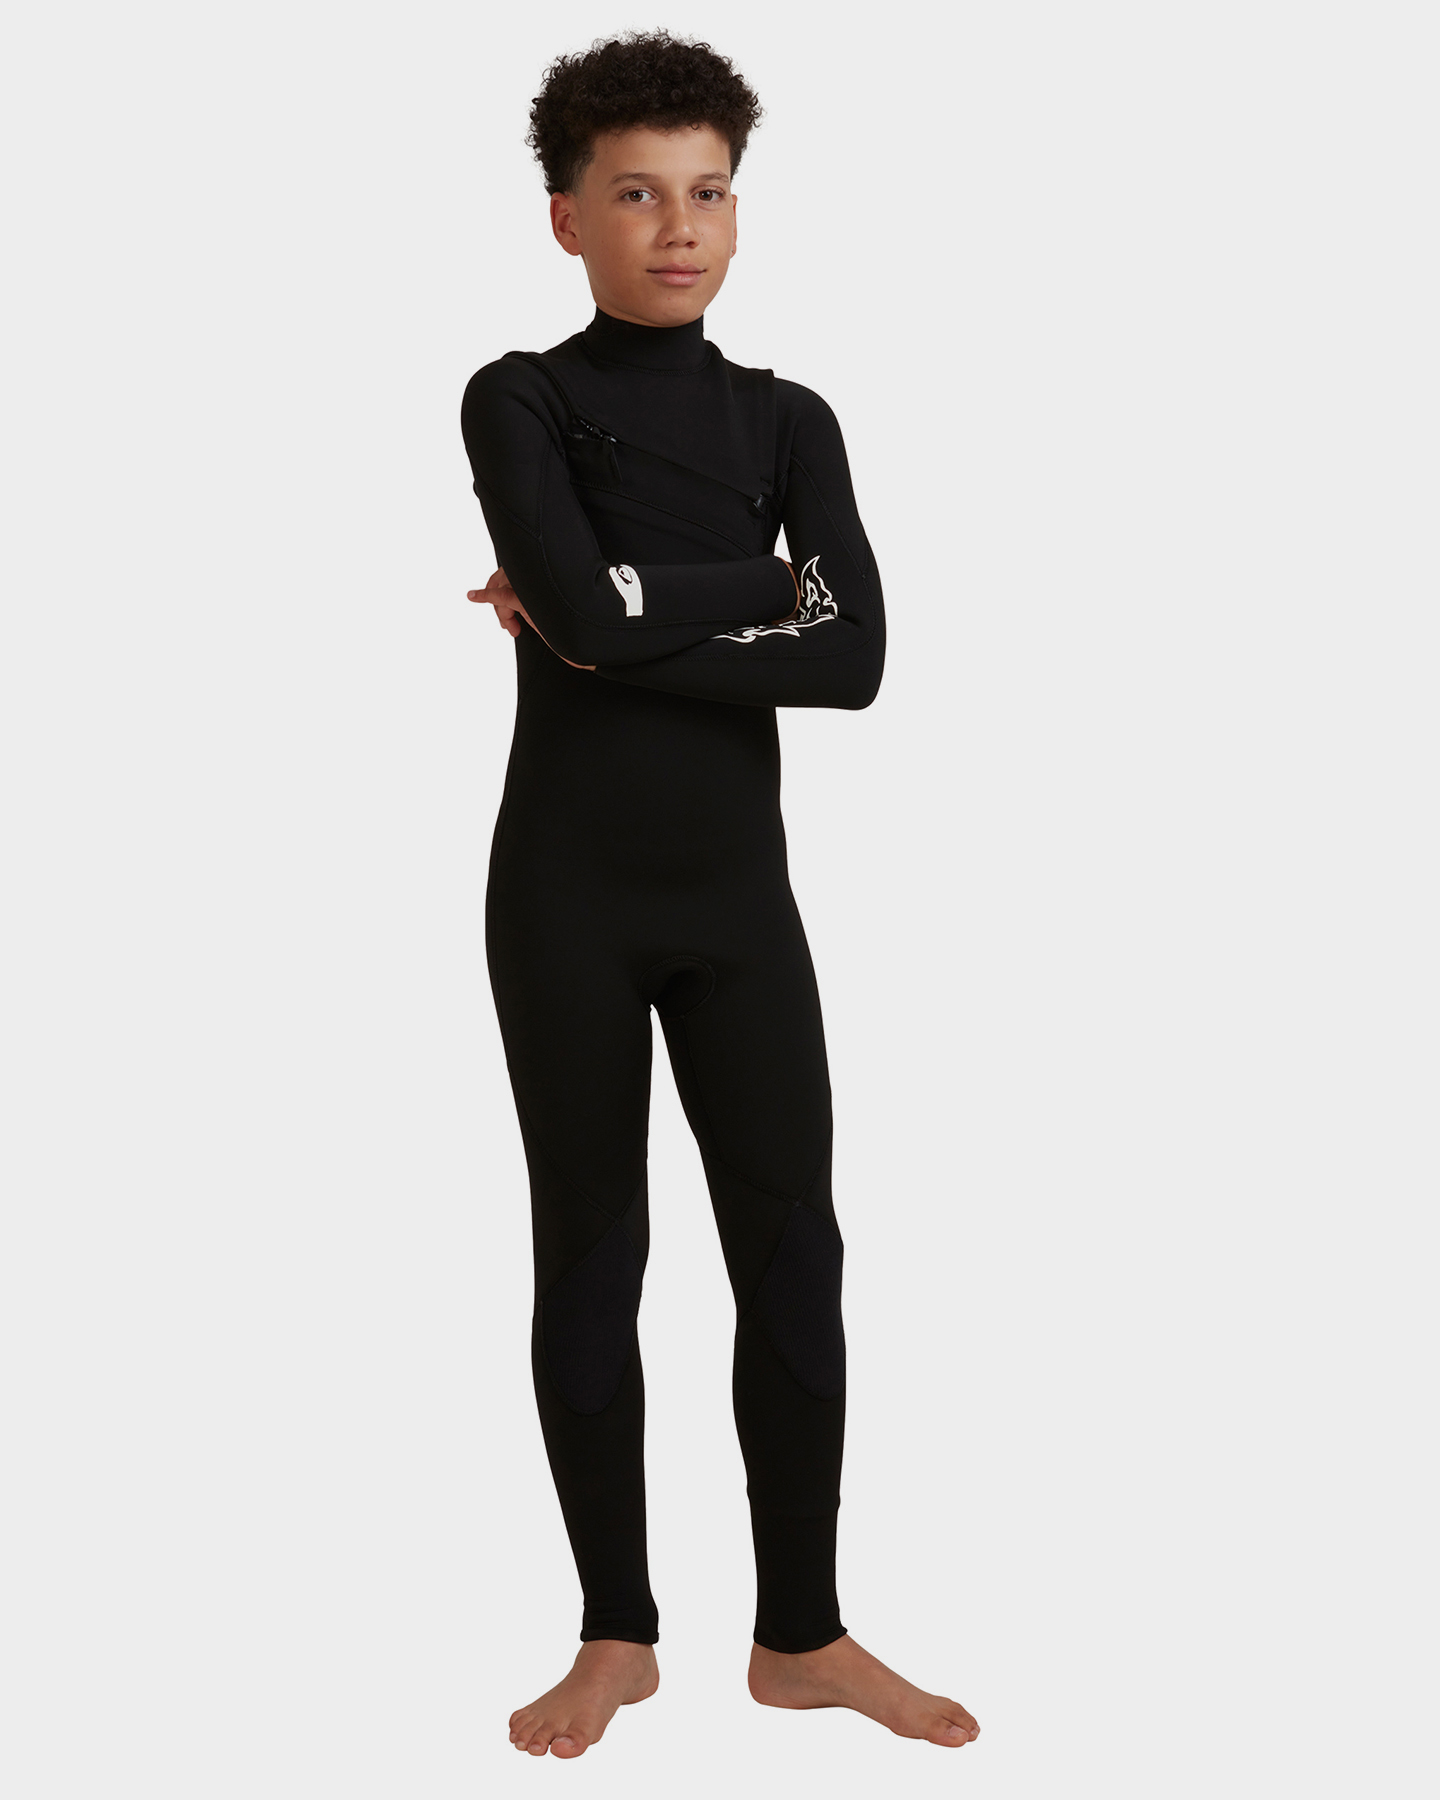 Quiksilver Boys 8-16 Highline Limited 3X2Mm Chest Zip Steamer Wetsuit ...